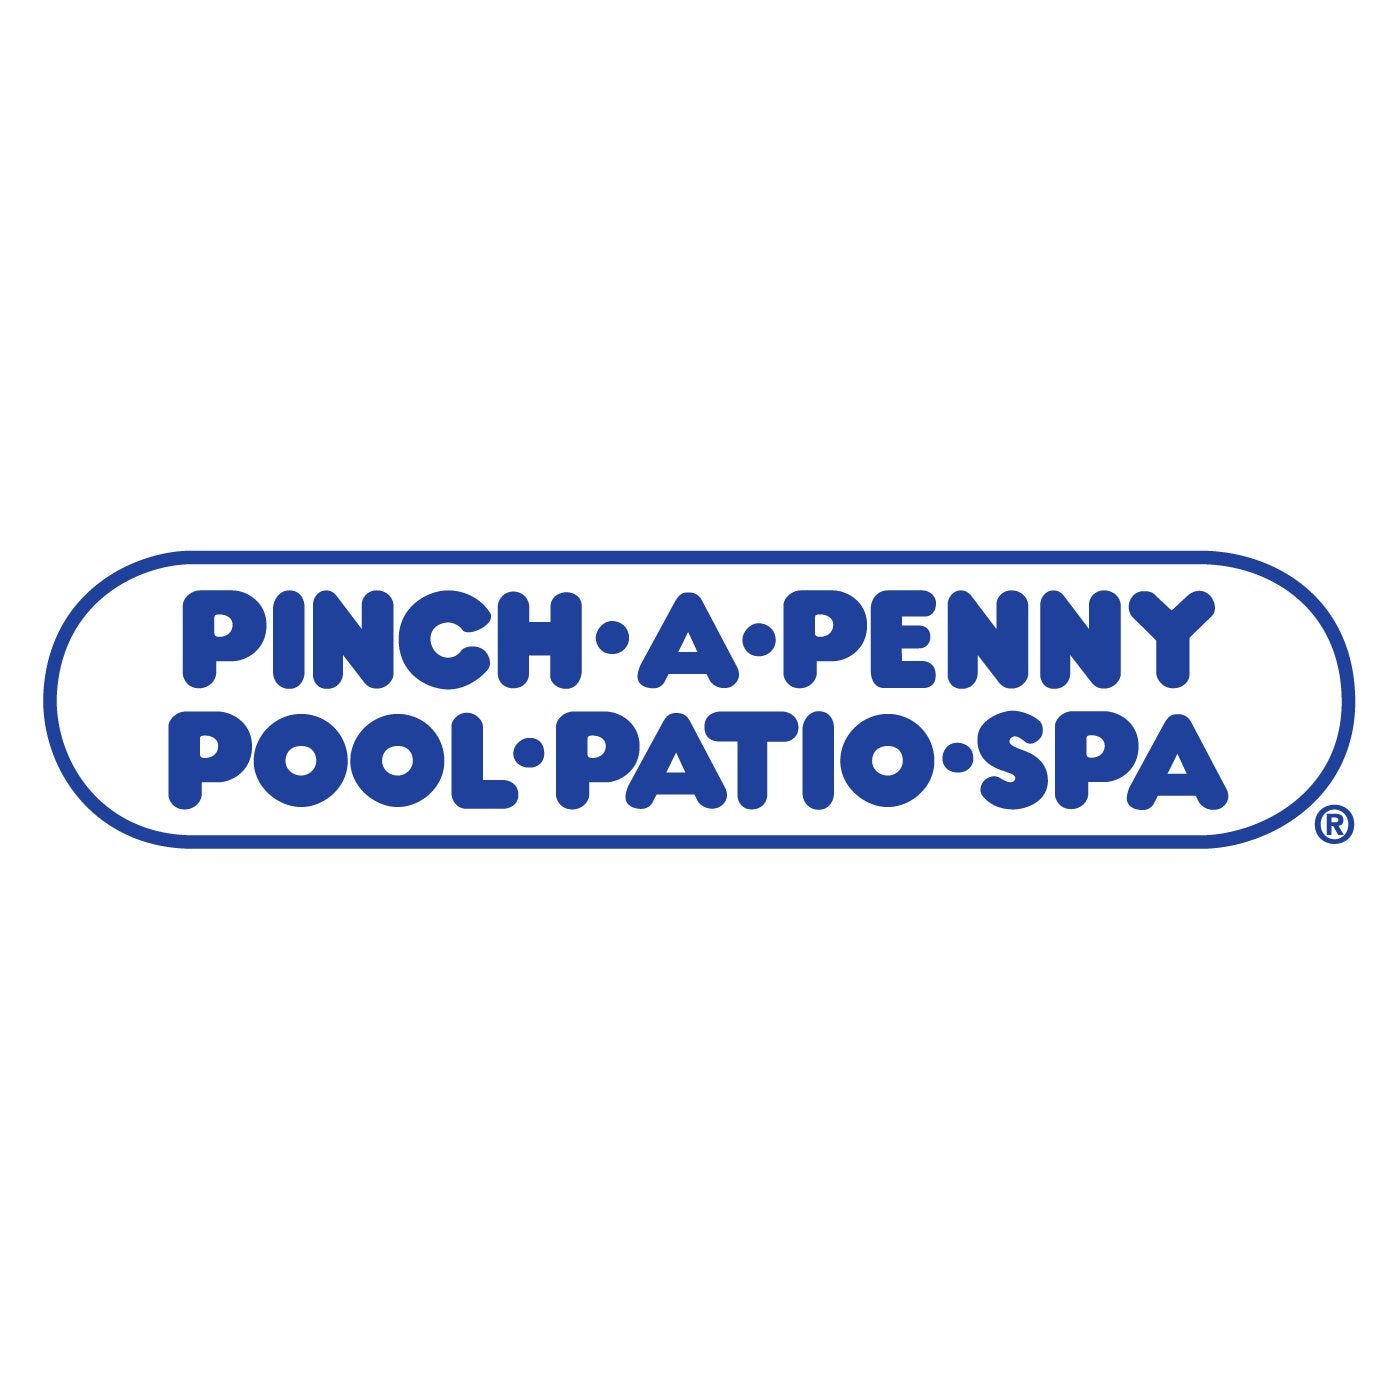 Manchester Barbecue Pellets Now at Pinch A Penny Pool Patio & Spa in Lakeland, Florida: For Use in All Pellet Grills